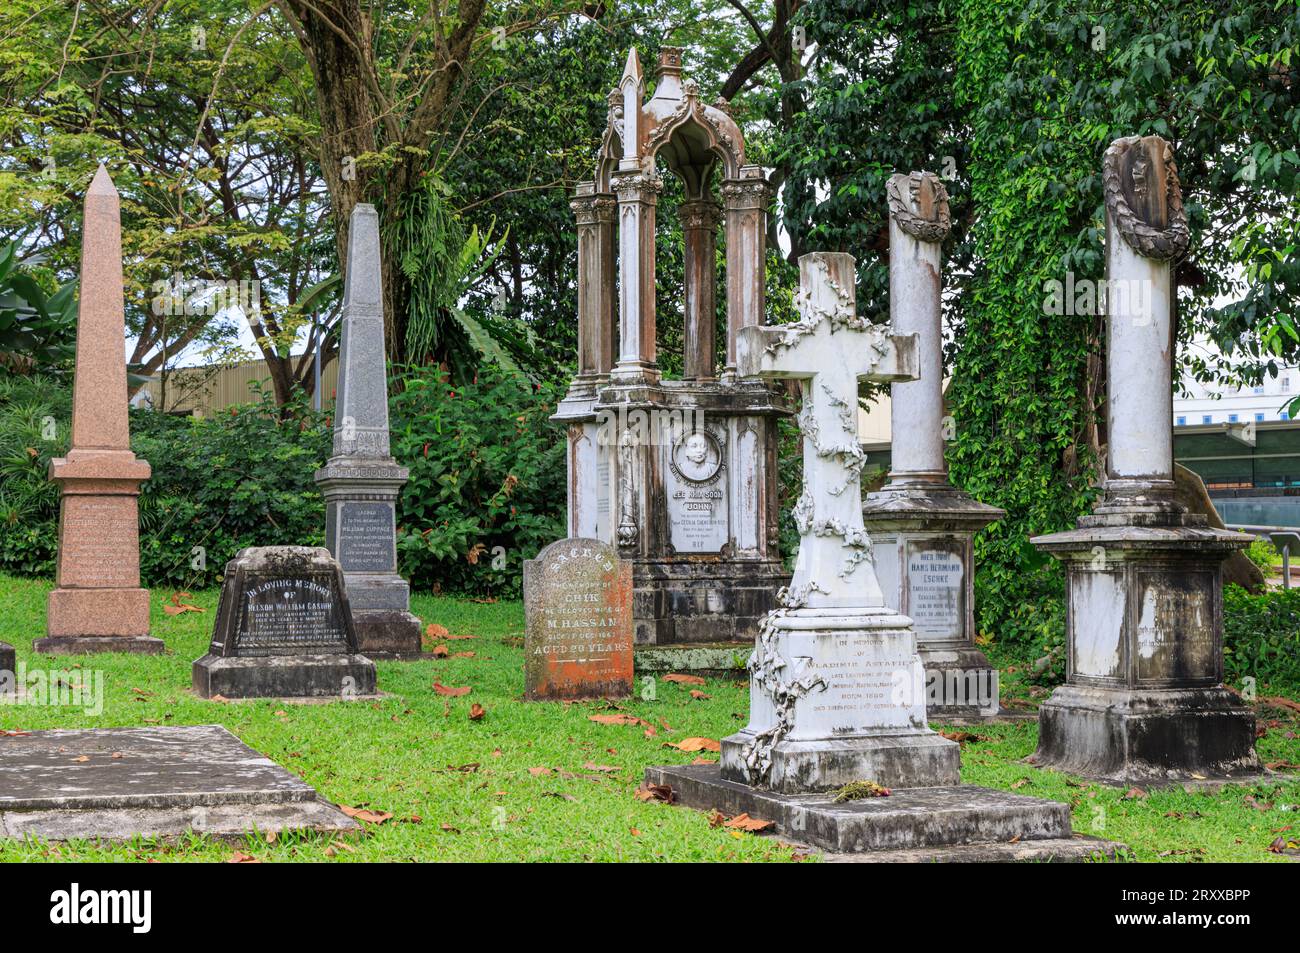 Cemetery Grave Stones at Fort Canning Park, Singapore Stock Photo